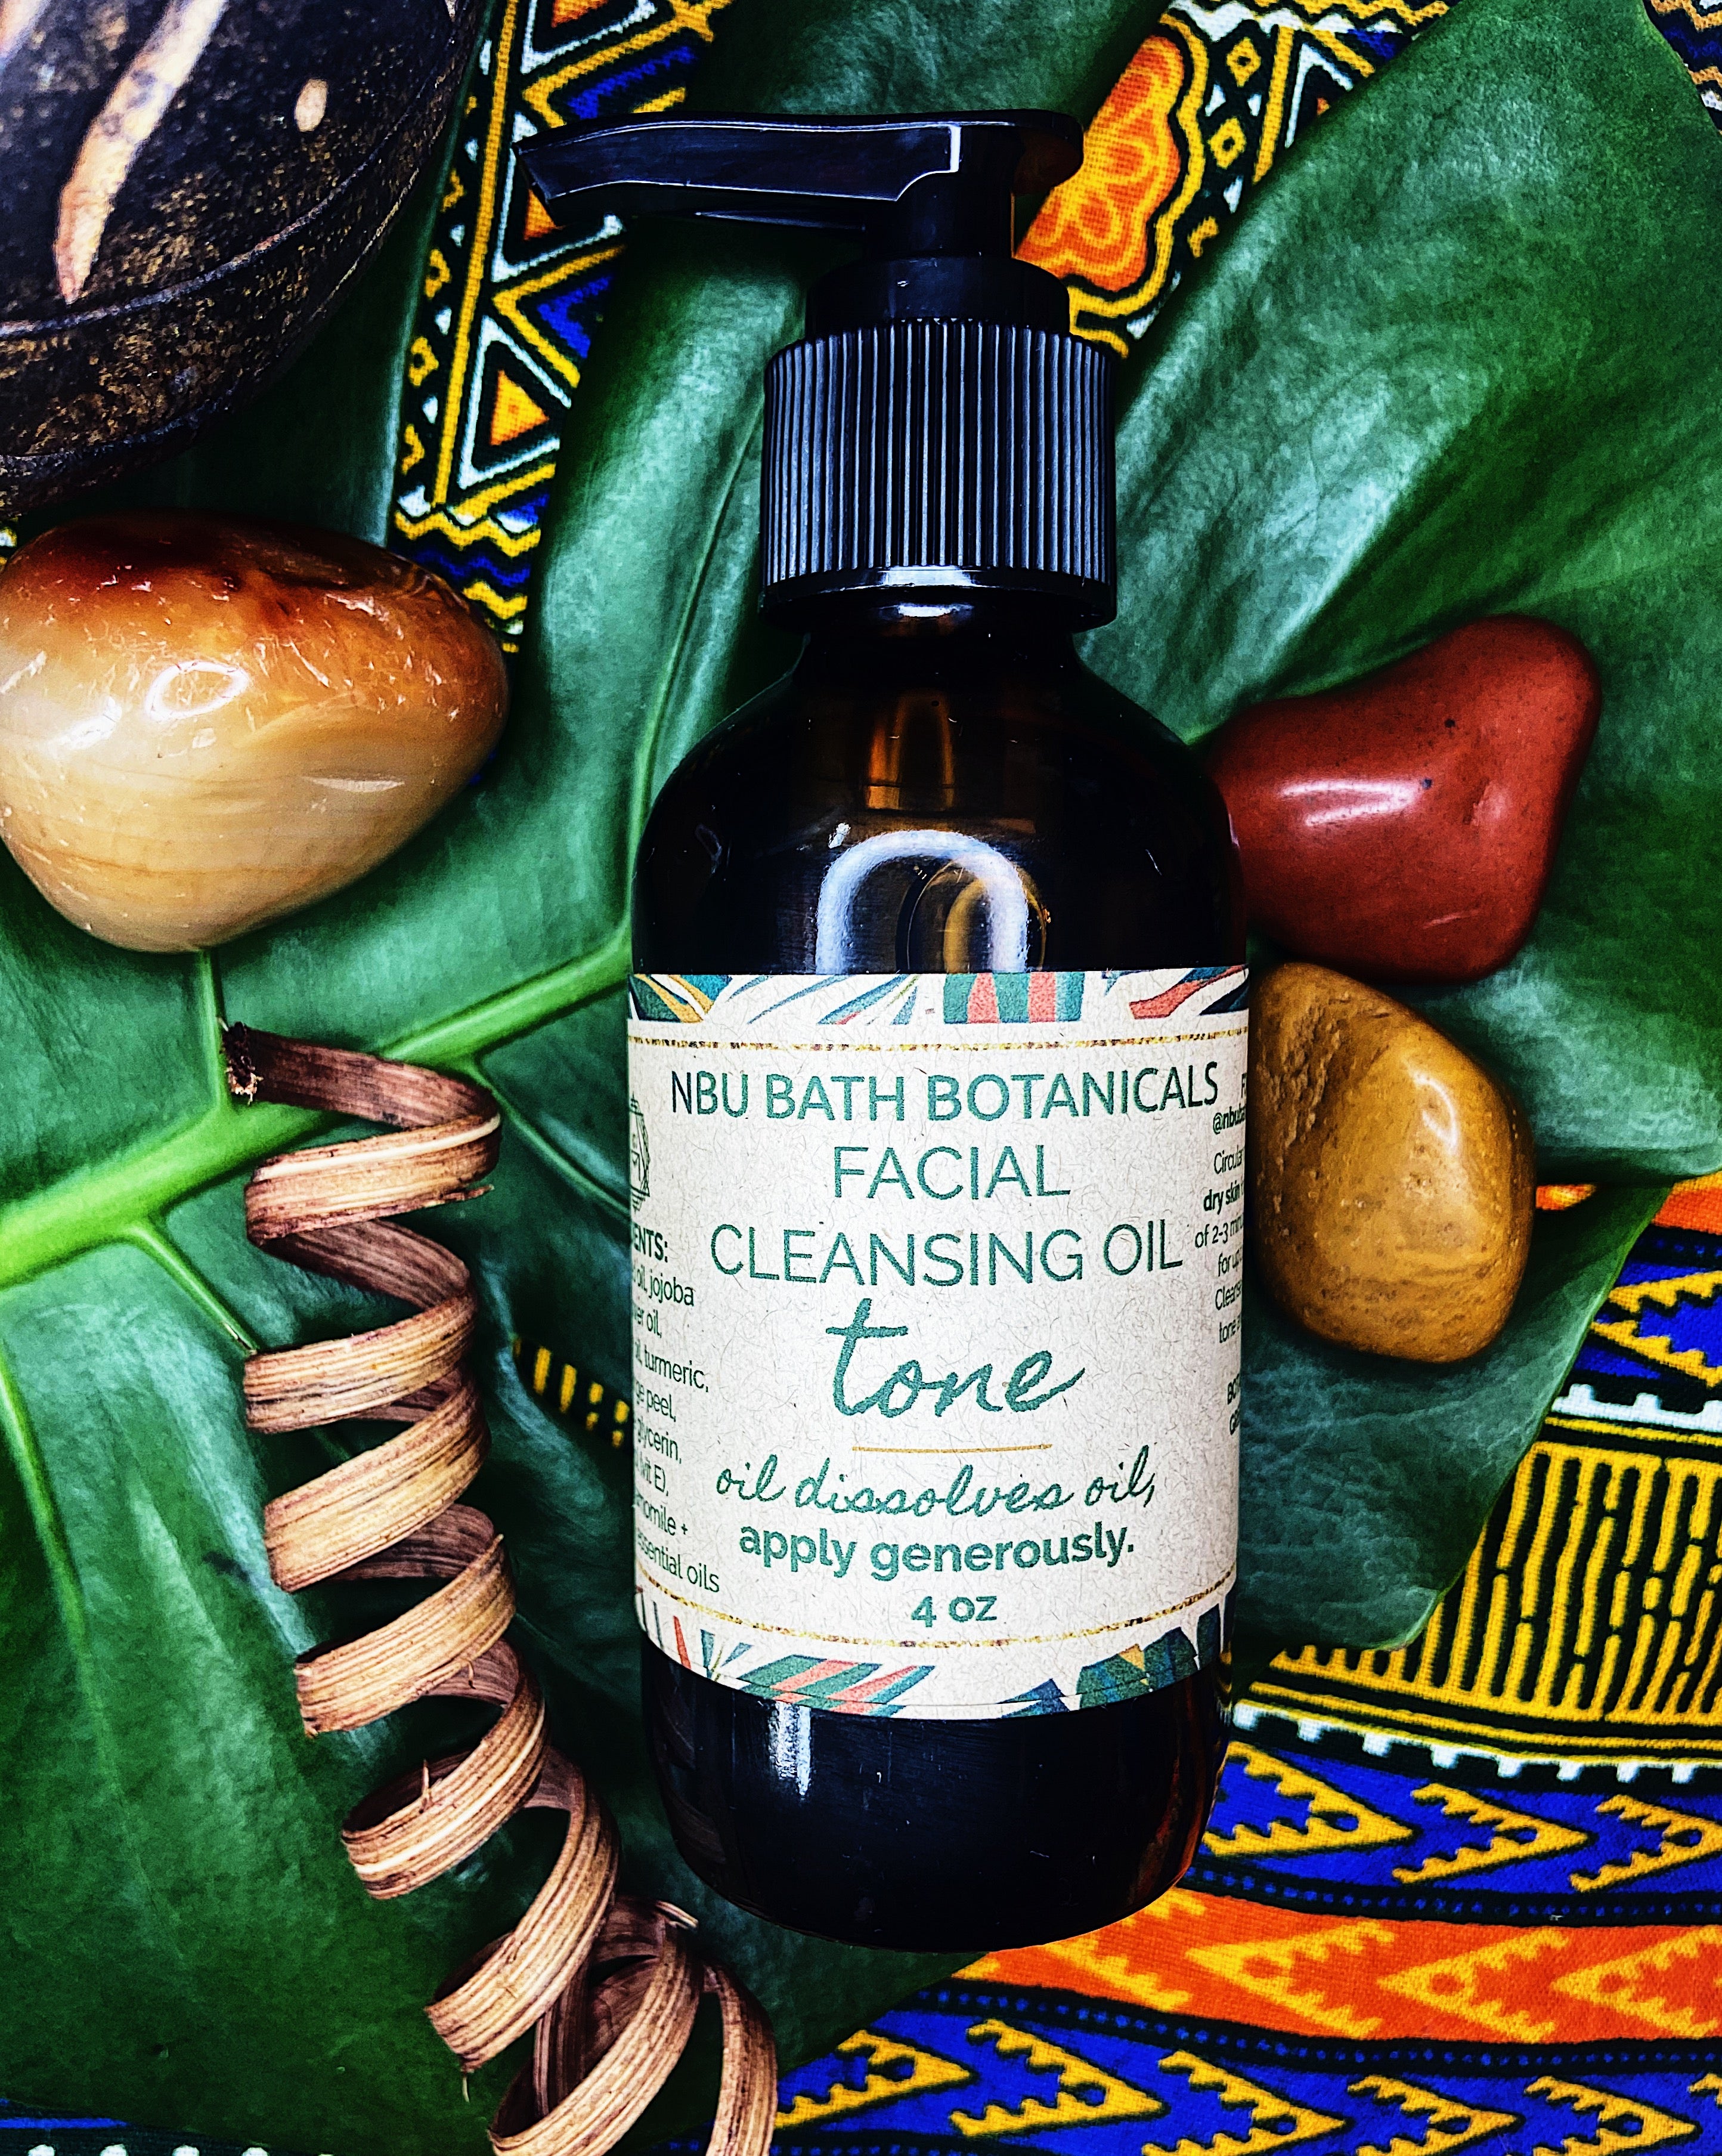 Facial Cleansing Oil • TONE